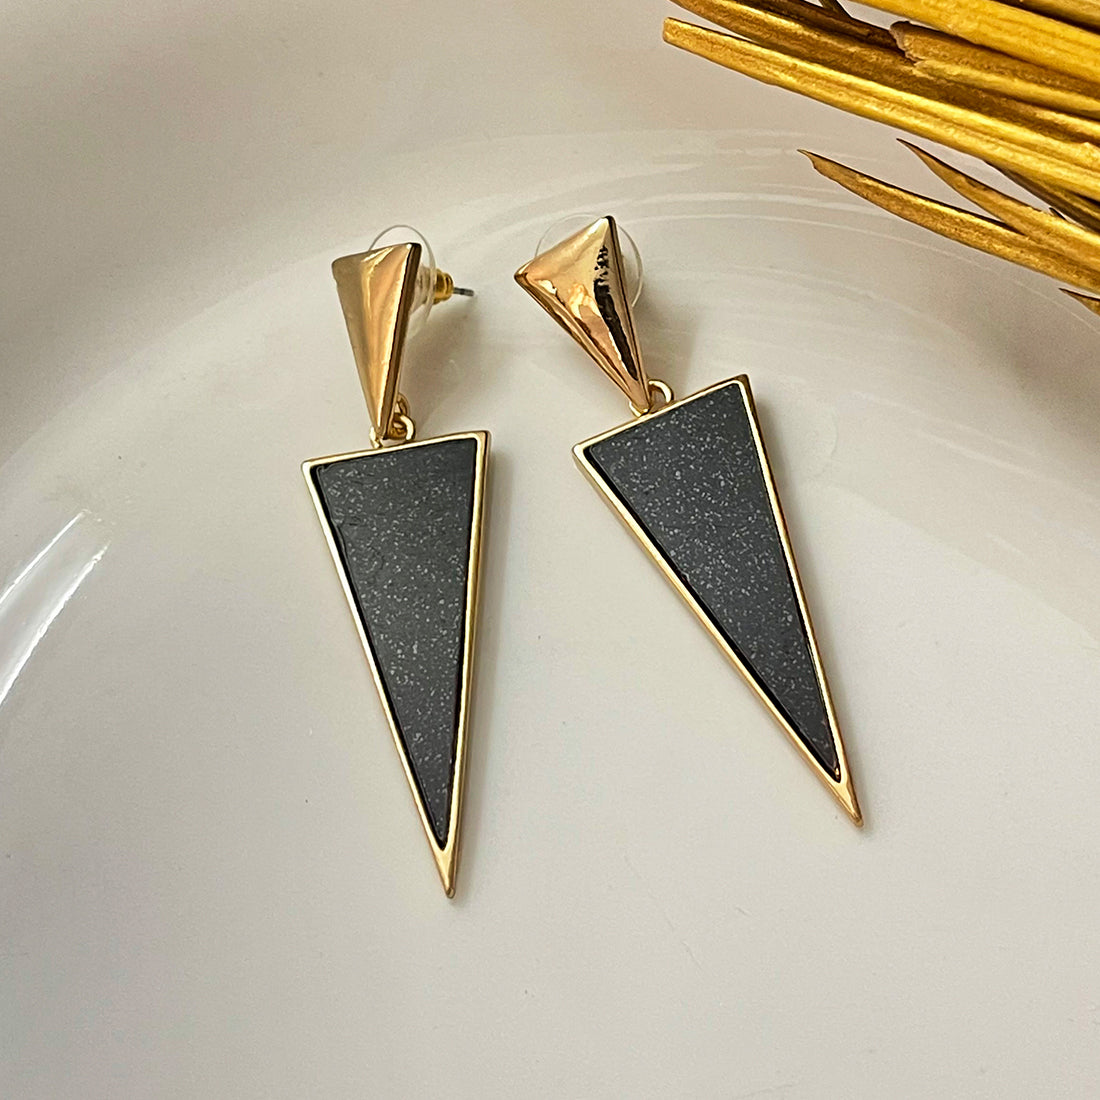 Contemporary Black Acrylic Gold-Toned Double Triangular Drop Earrings